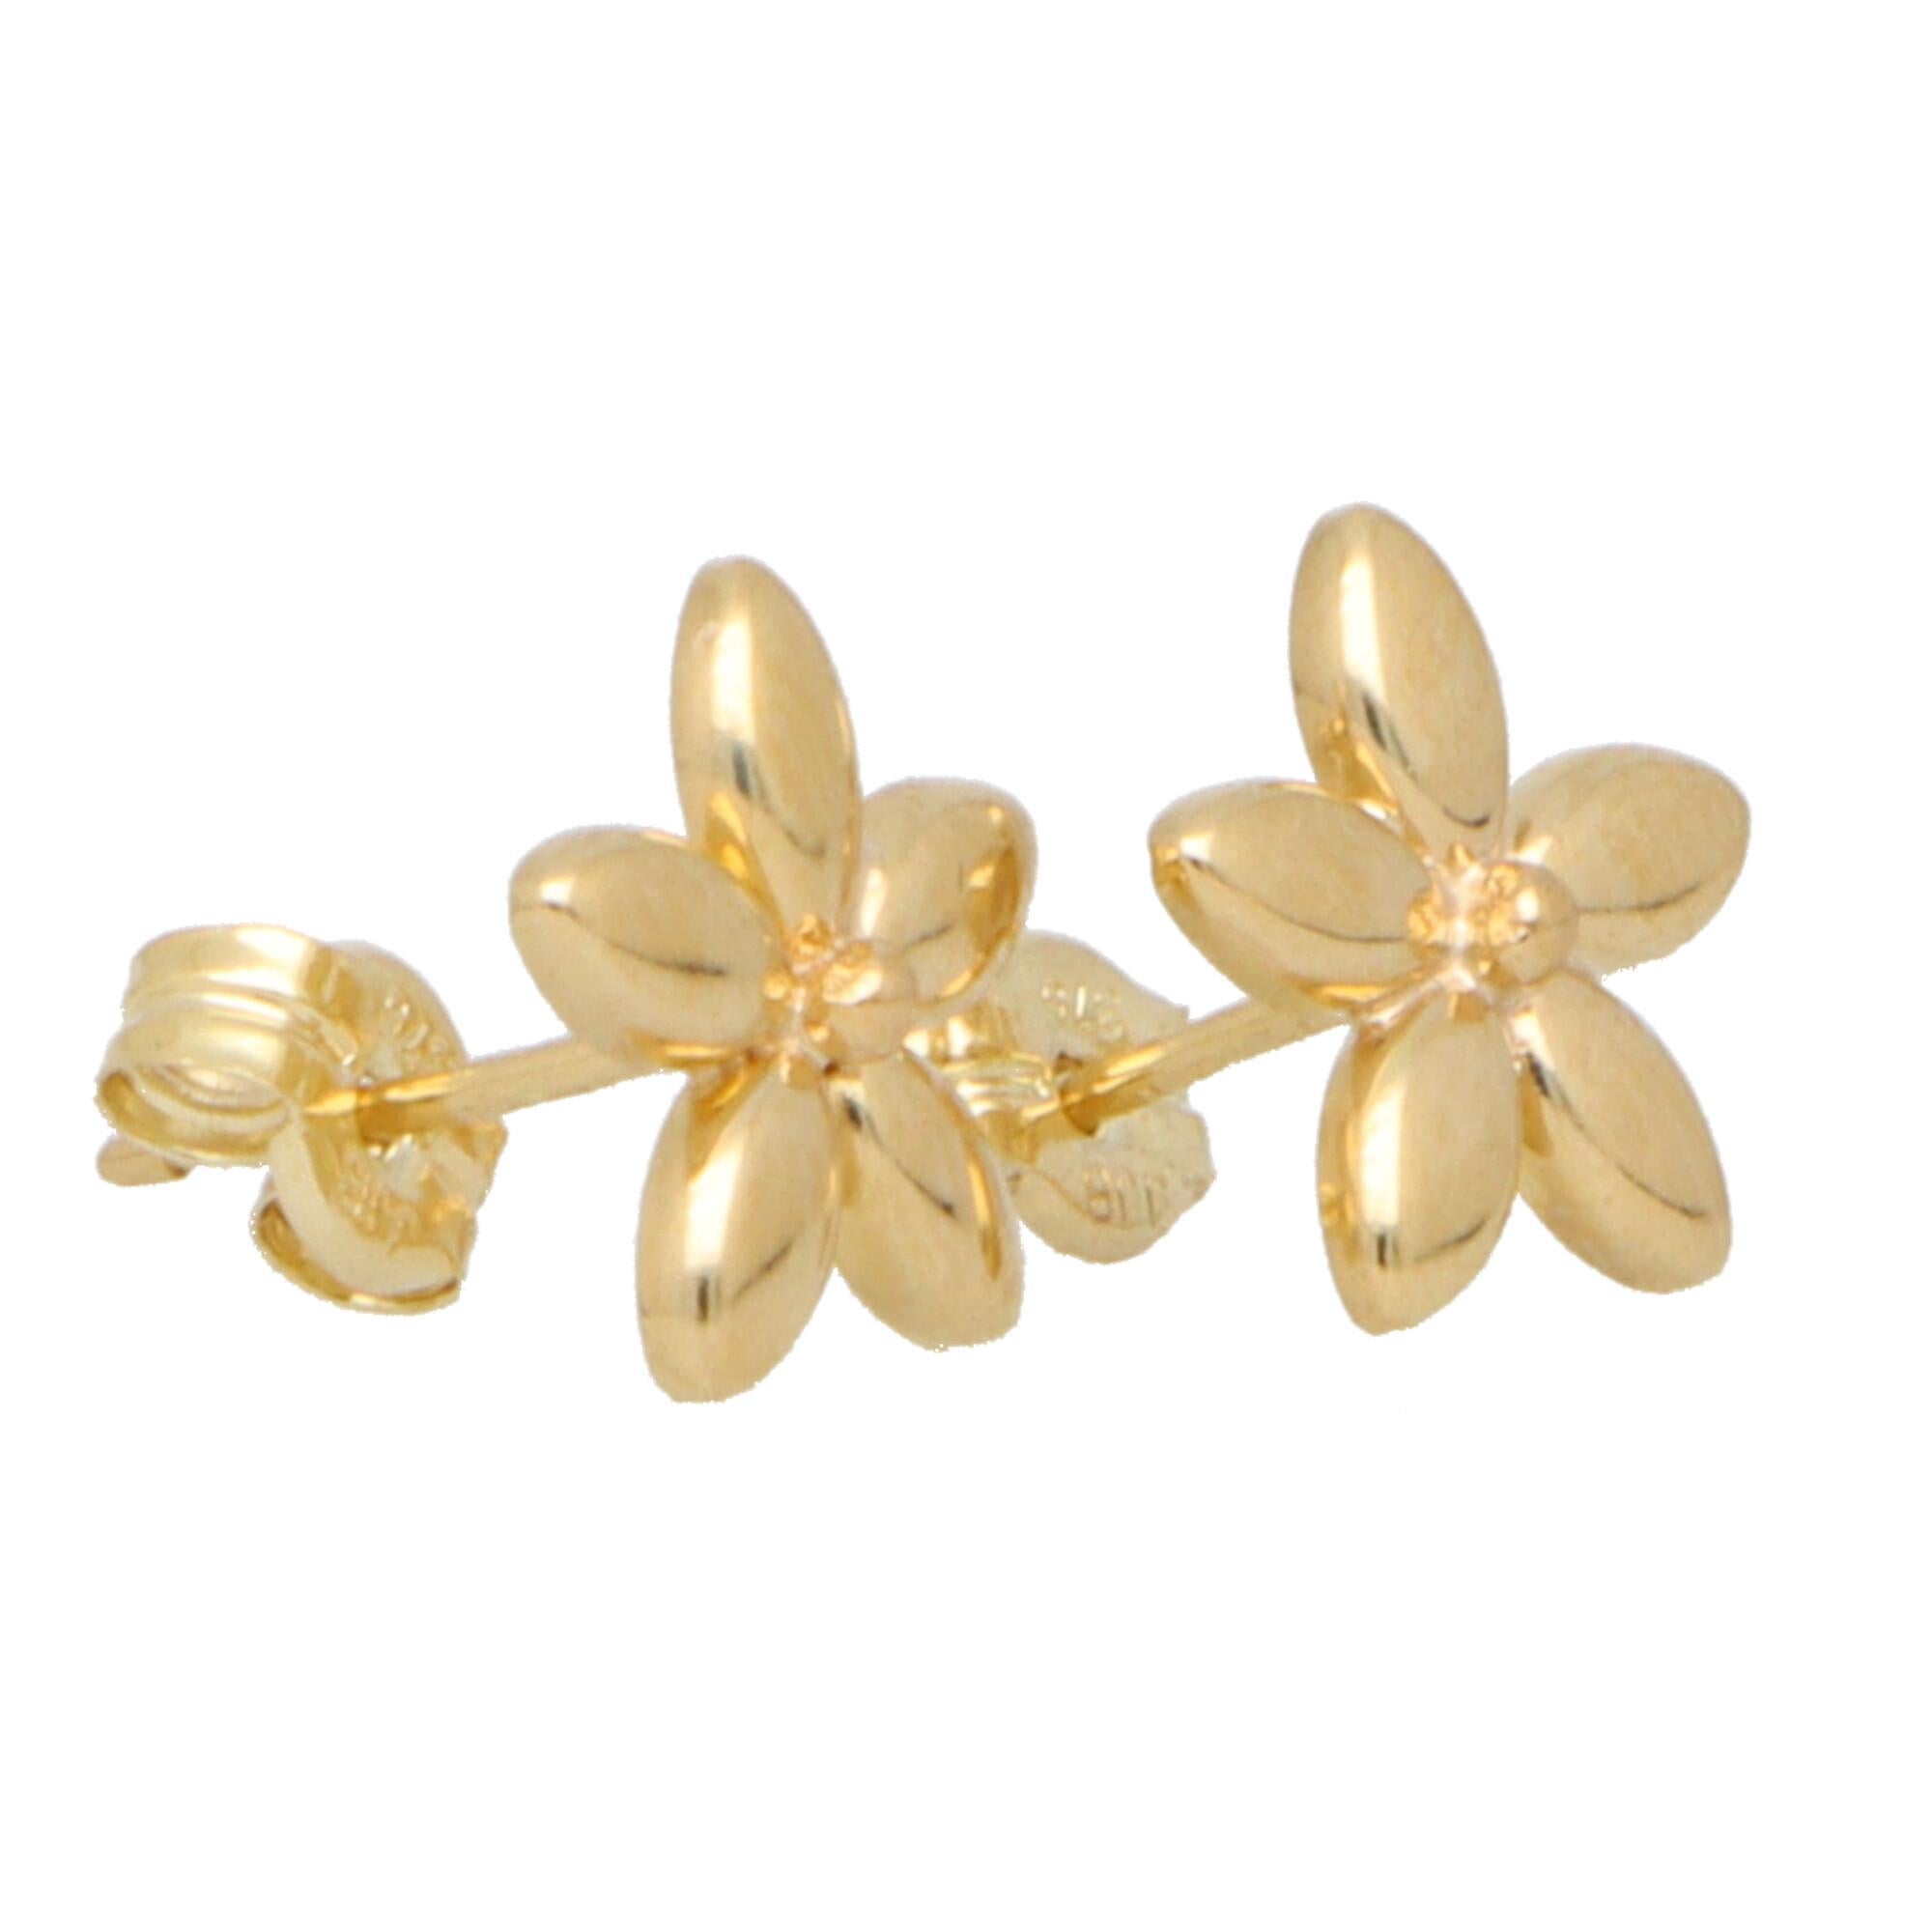 An elegant pair flower stud earrings set in 9k yellow gold.

Each earring consists of a five petaled flower and they are secured to the reverse with a solid gold post and butterfly fitting.

Due to the design and size, these earrings would make a